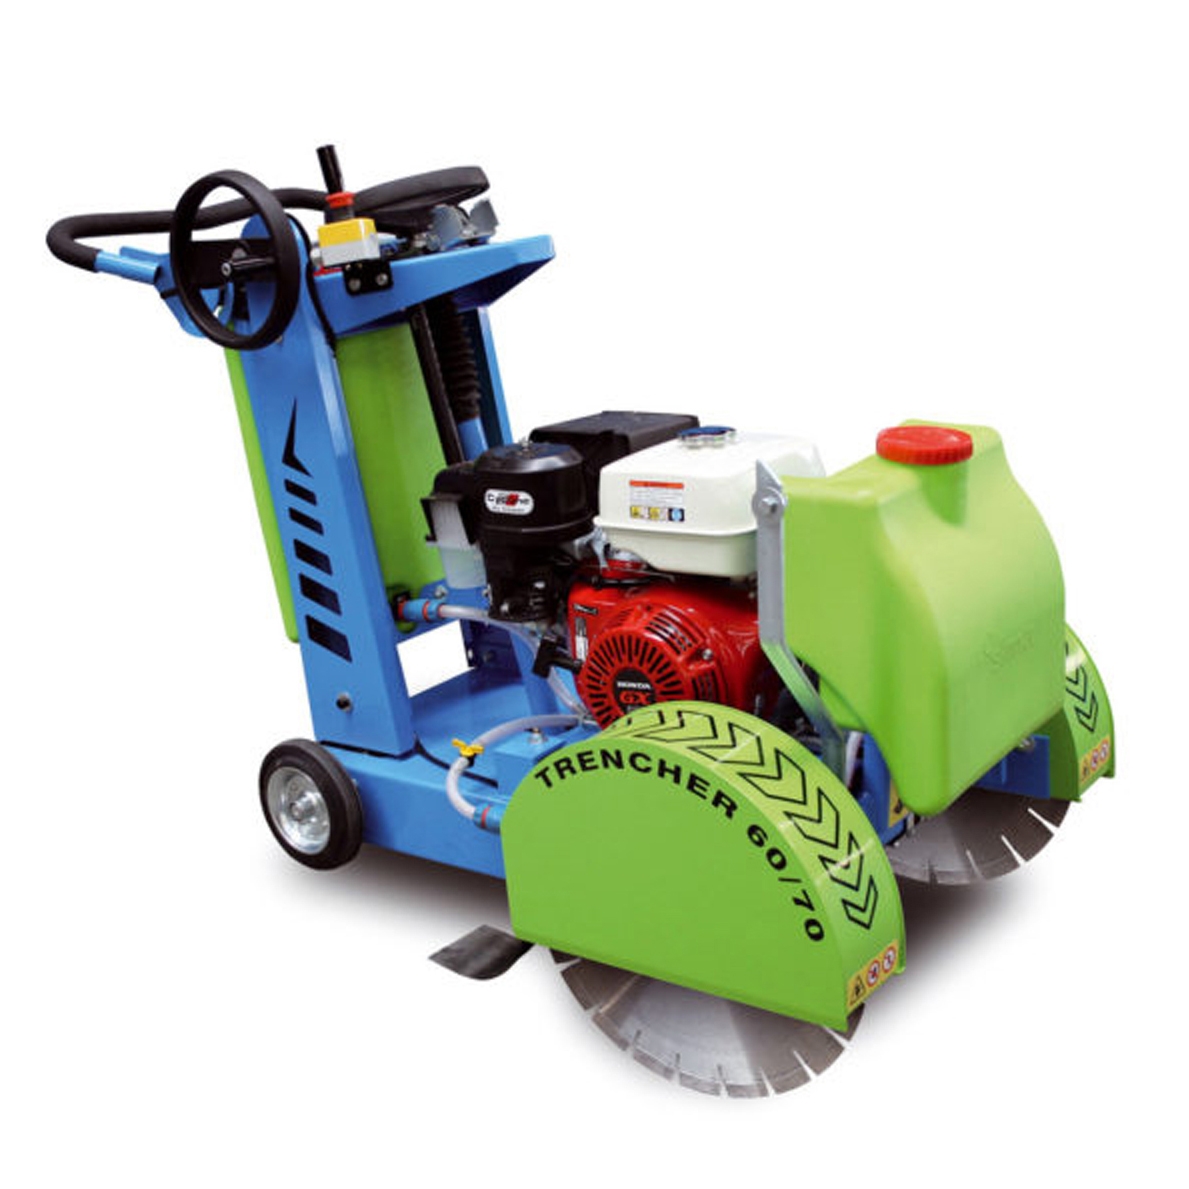 SIMA Cobra Trencher Double Blade Road Saw